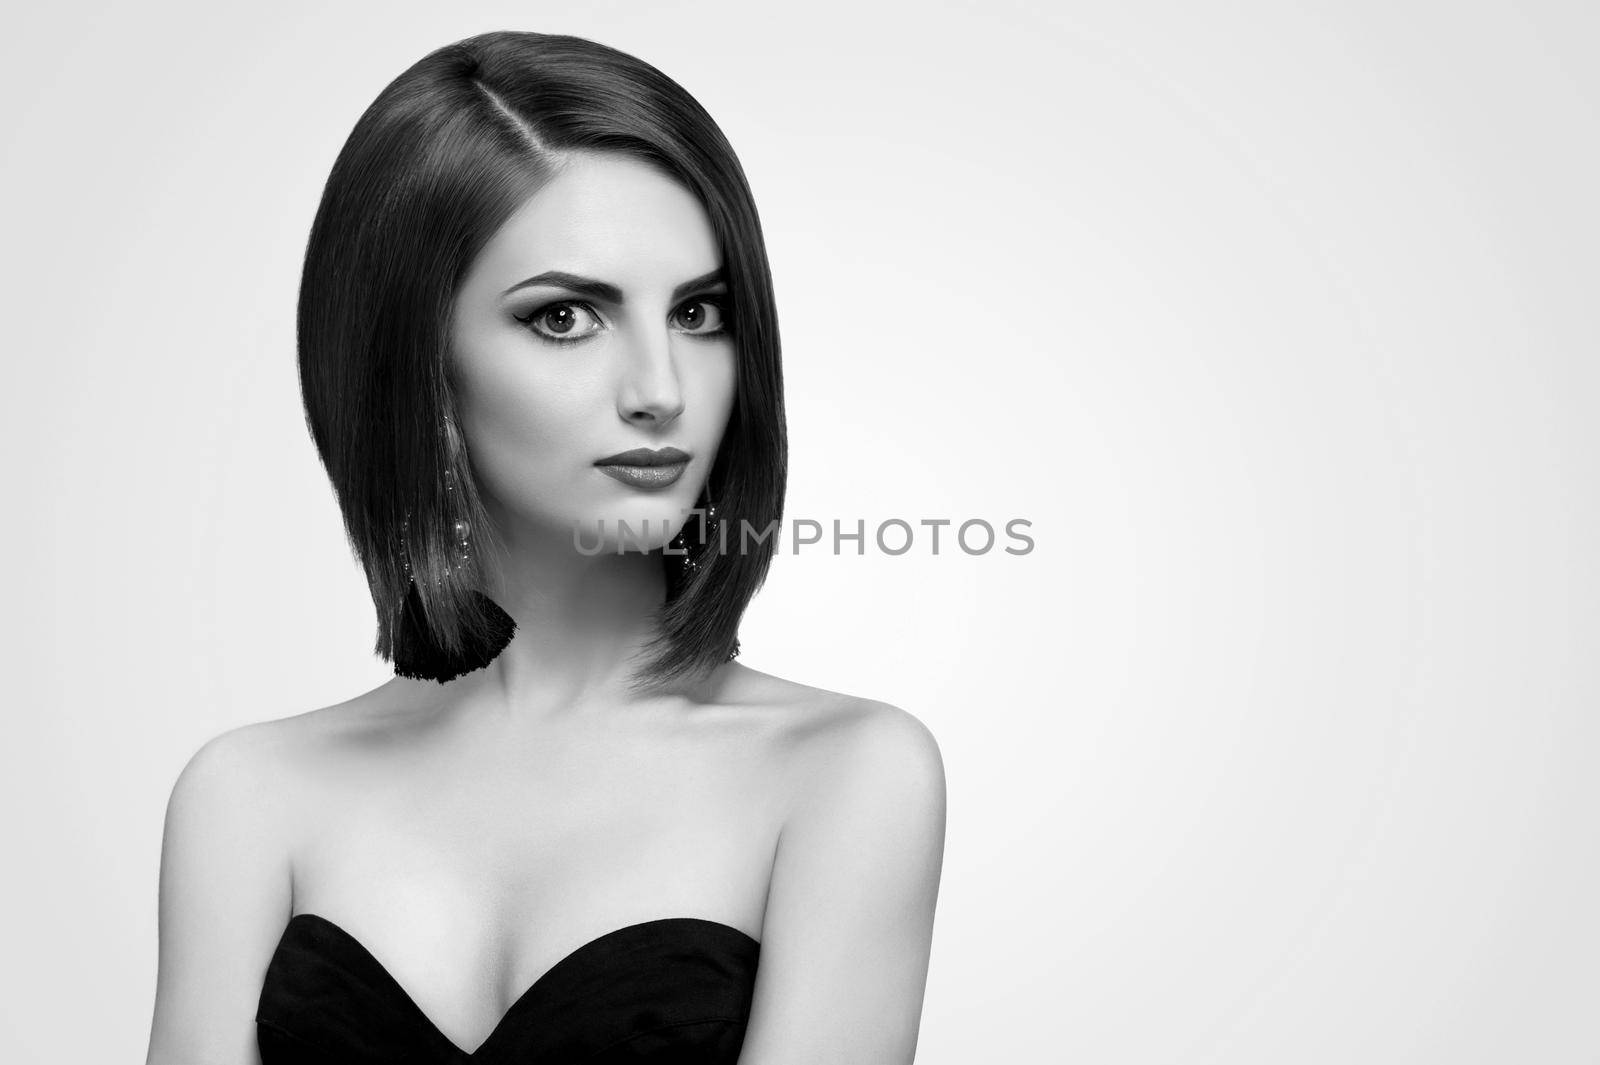 Black and white studio shots of a classy young woman by SerhiiBobyk